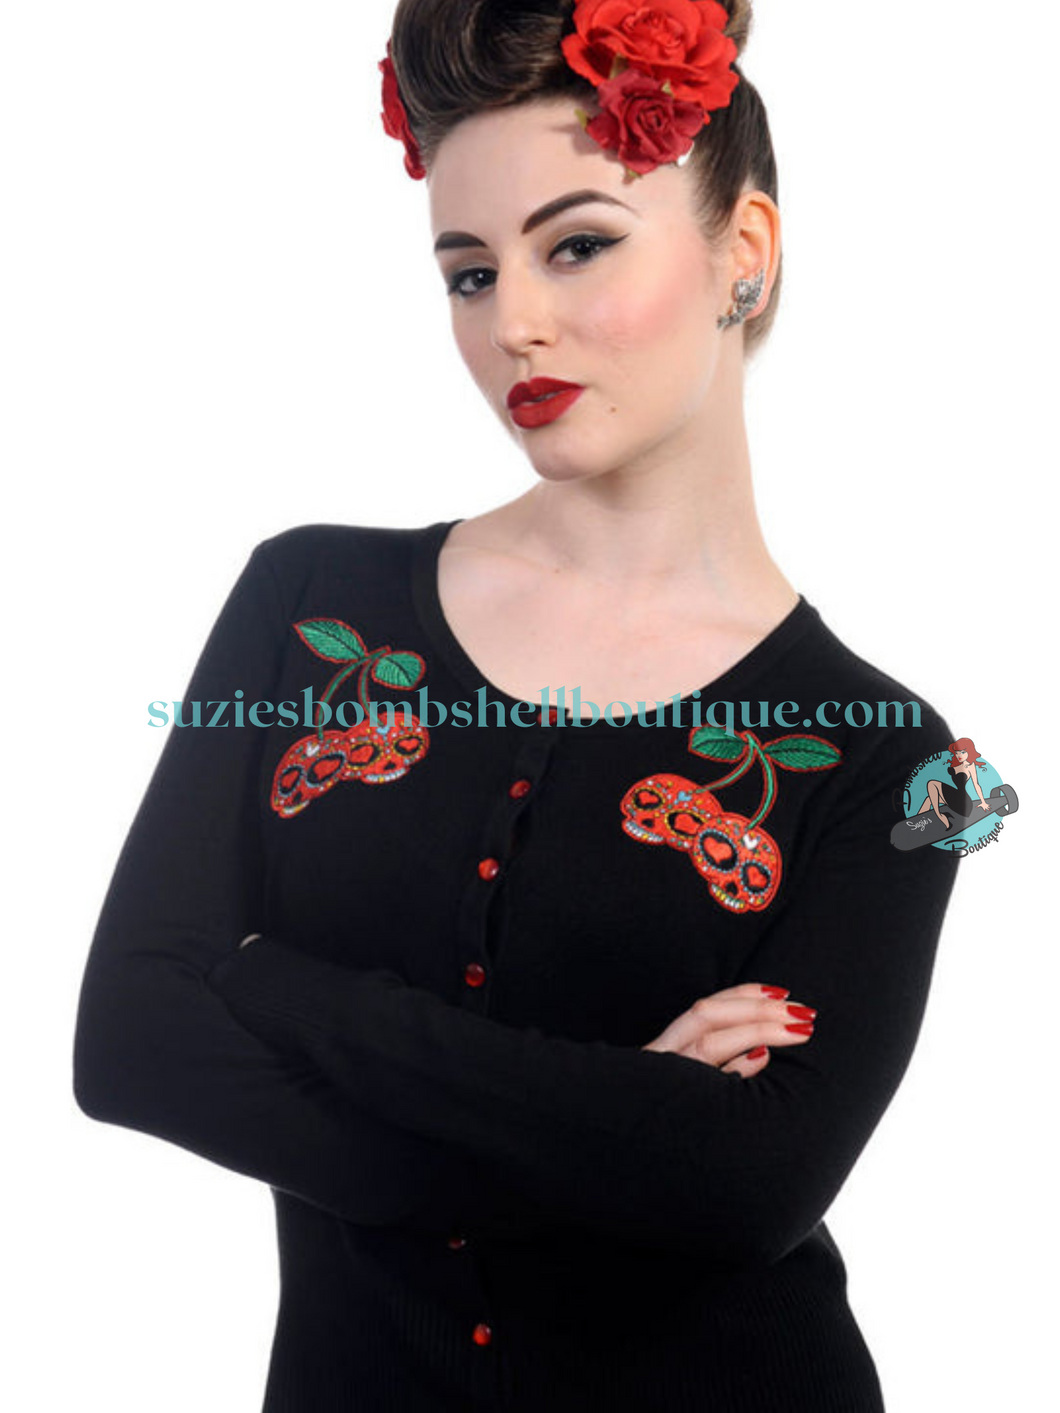 Banned Retro Lost Queen CanadaBanned Retro Black Cherry Skulls Rockabilly Cardigan black knit buttoned top with red cherries that look like sugar skulls altfashion goth rockabilly pinup plus pinup clothing retro vintage sweater Canadian Pin-Up Shop Suzie's Bombshell Boutique